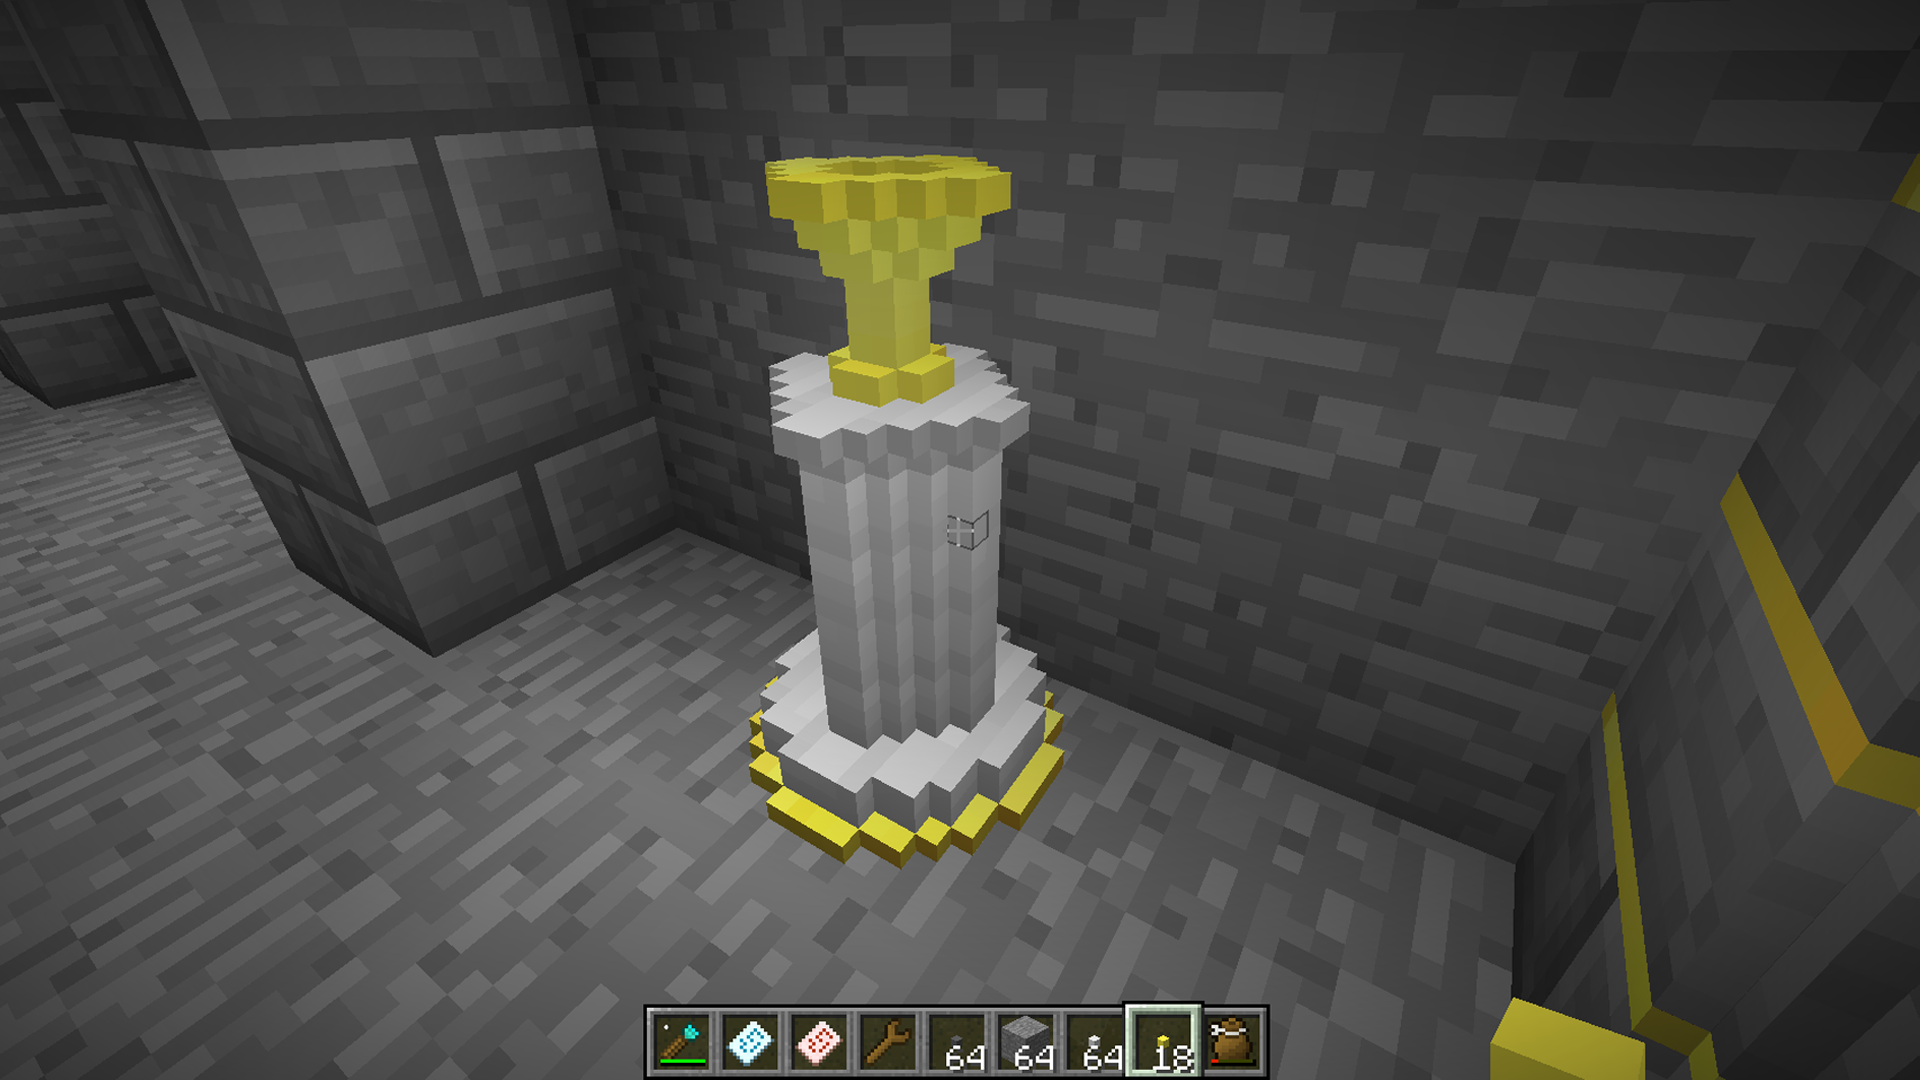 If there is 1 single mod you should use, it's Chisel. This is all